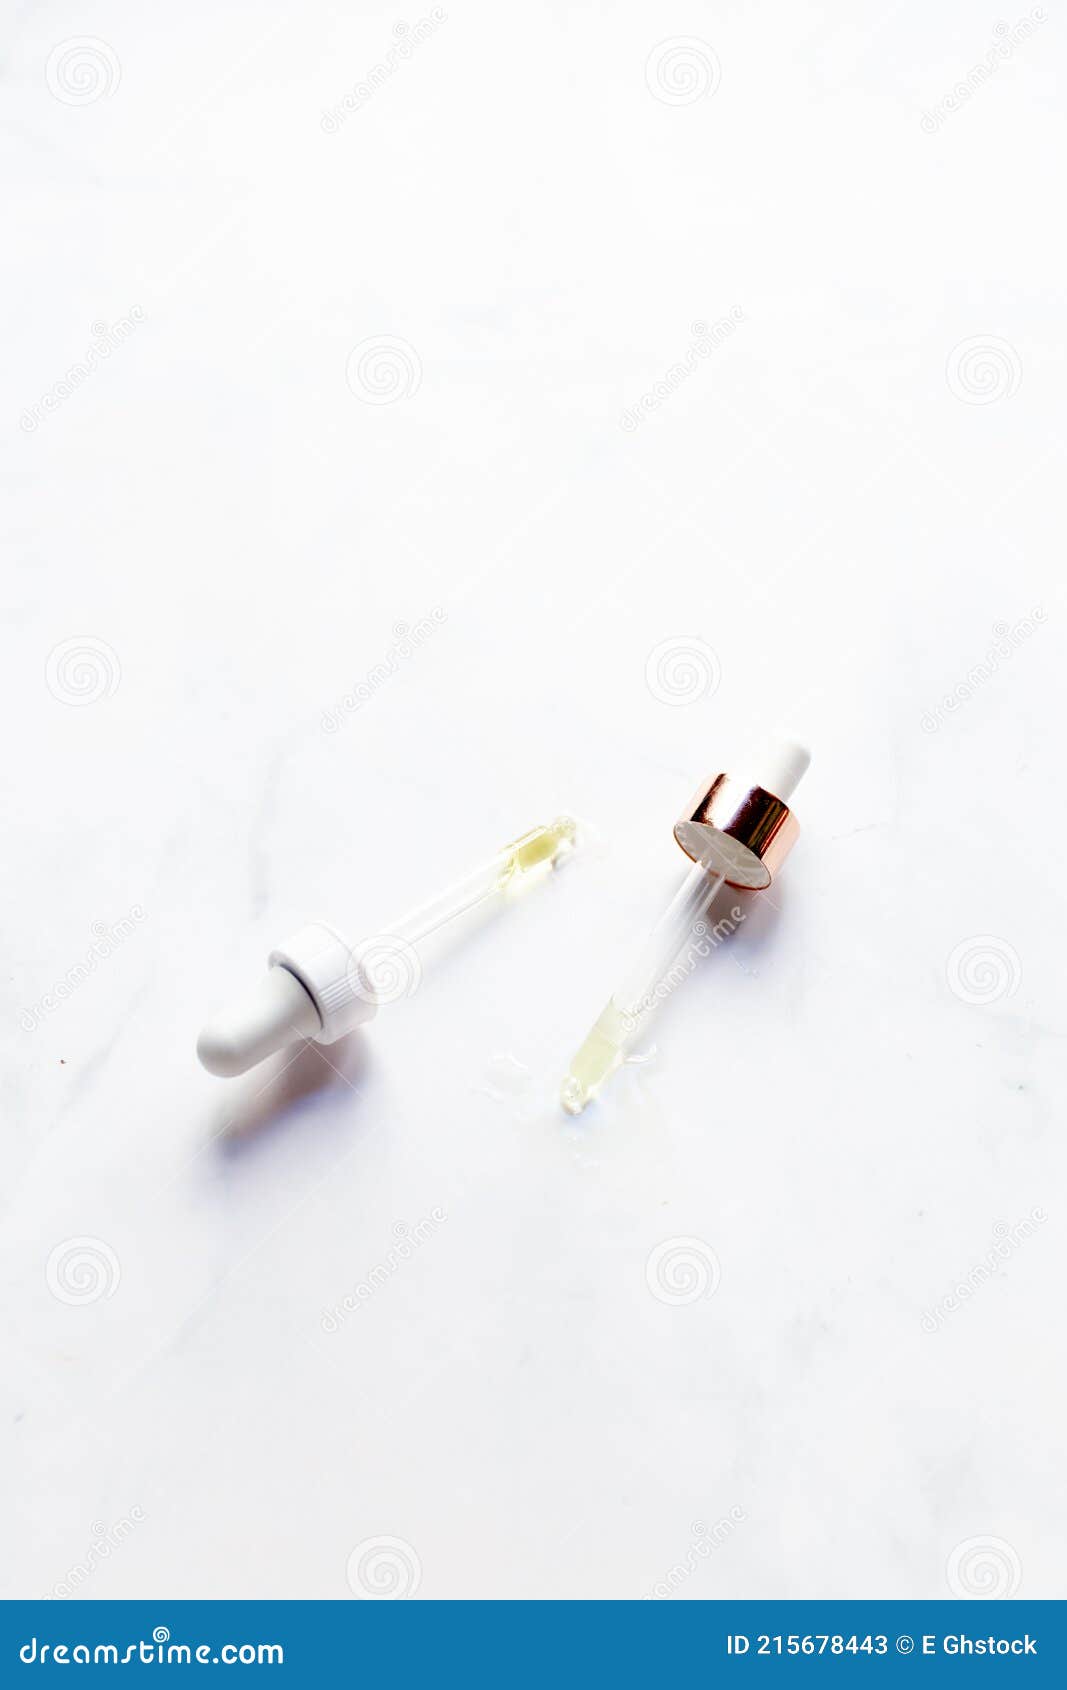 retinol oil serum oil pipettes on  marble background. beauty care concept